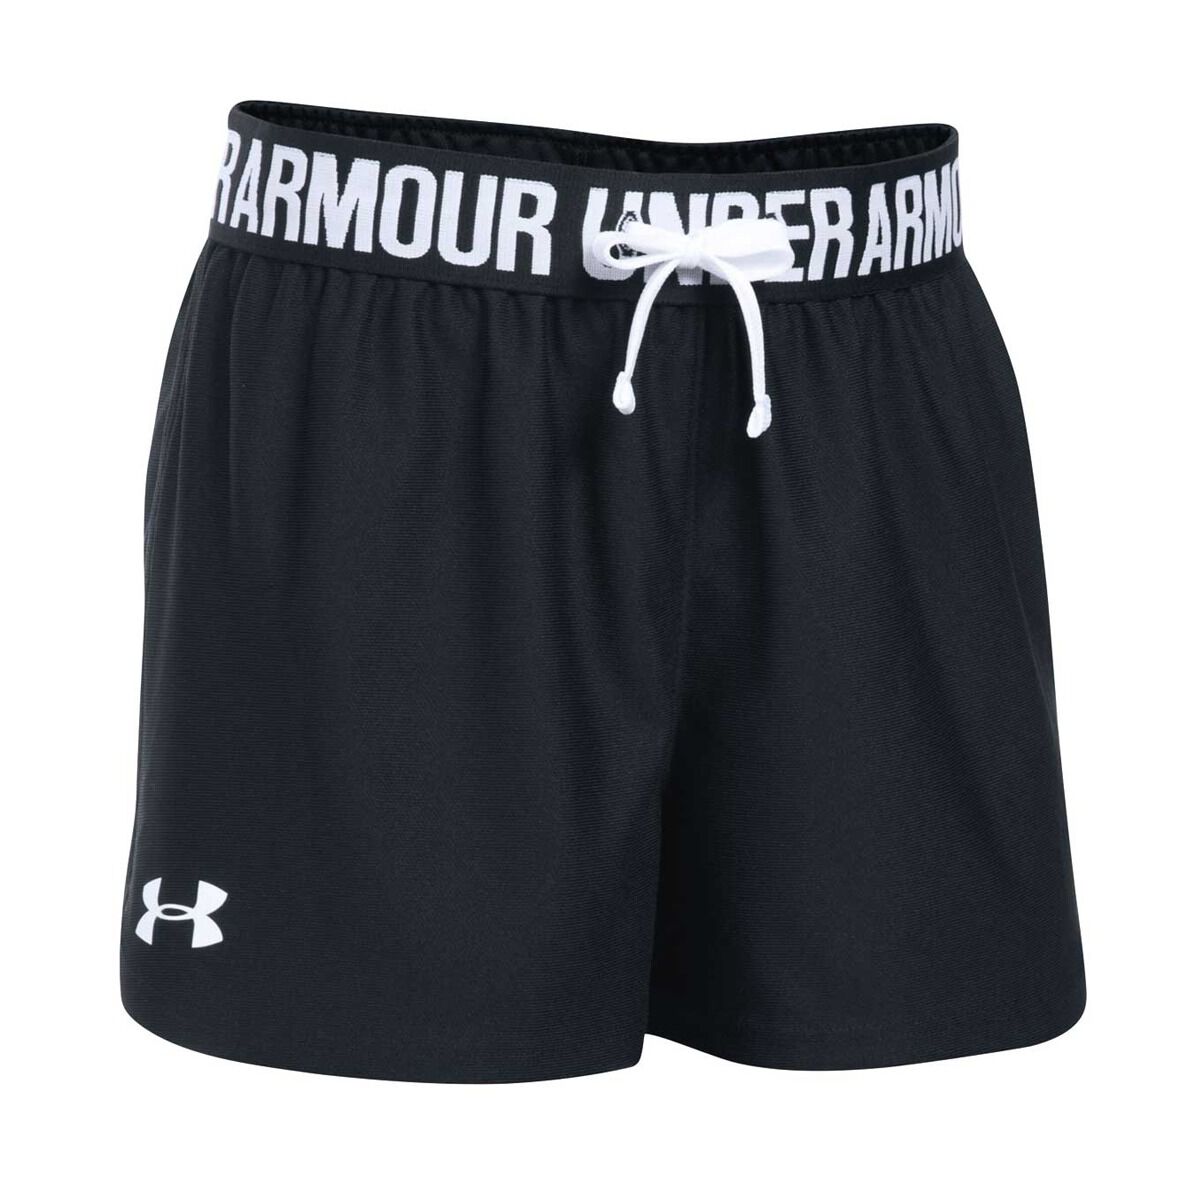 black and white under armour shorts